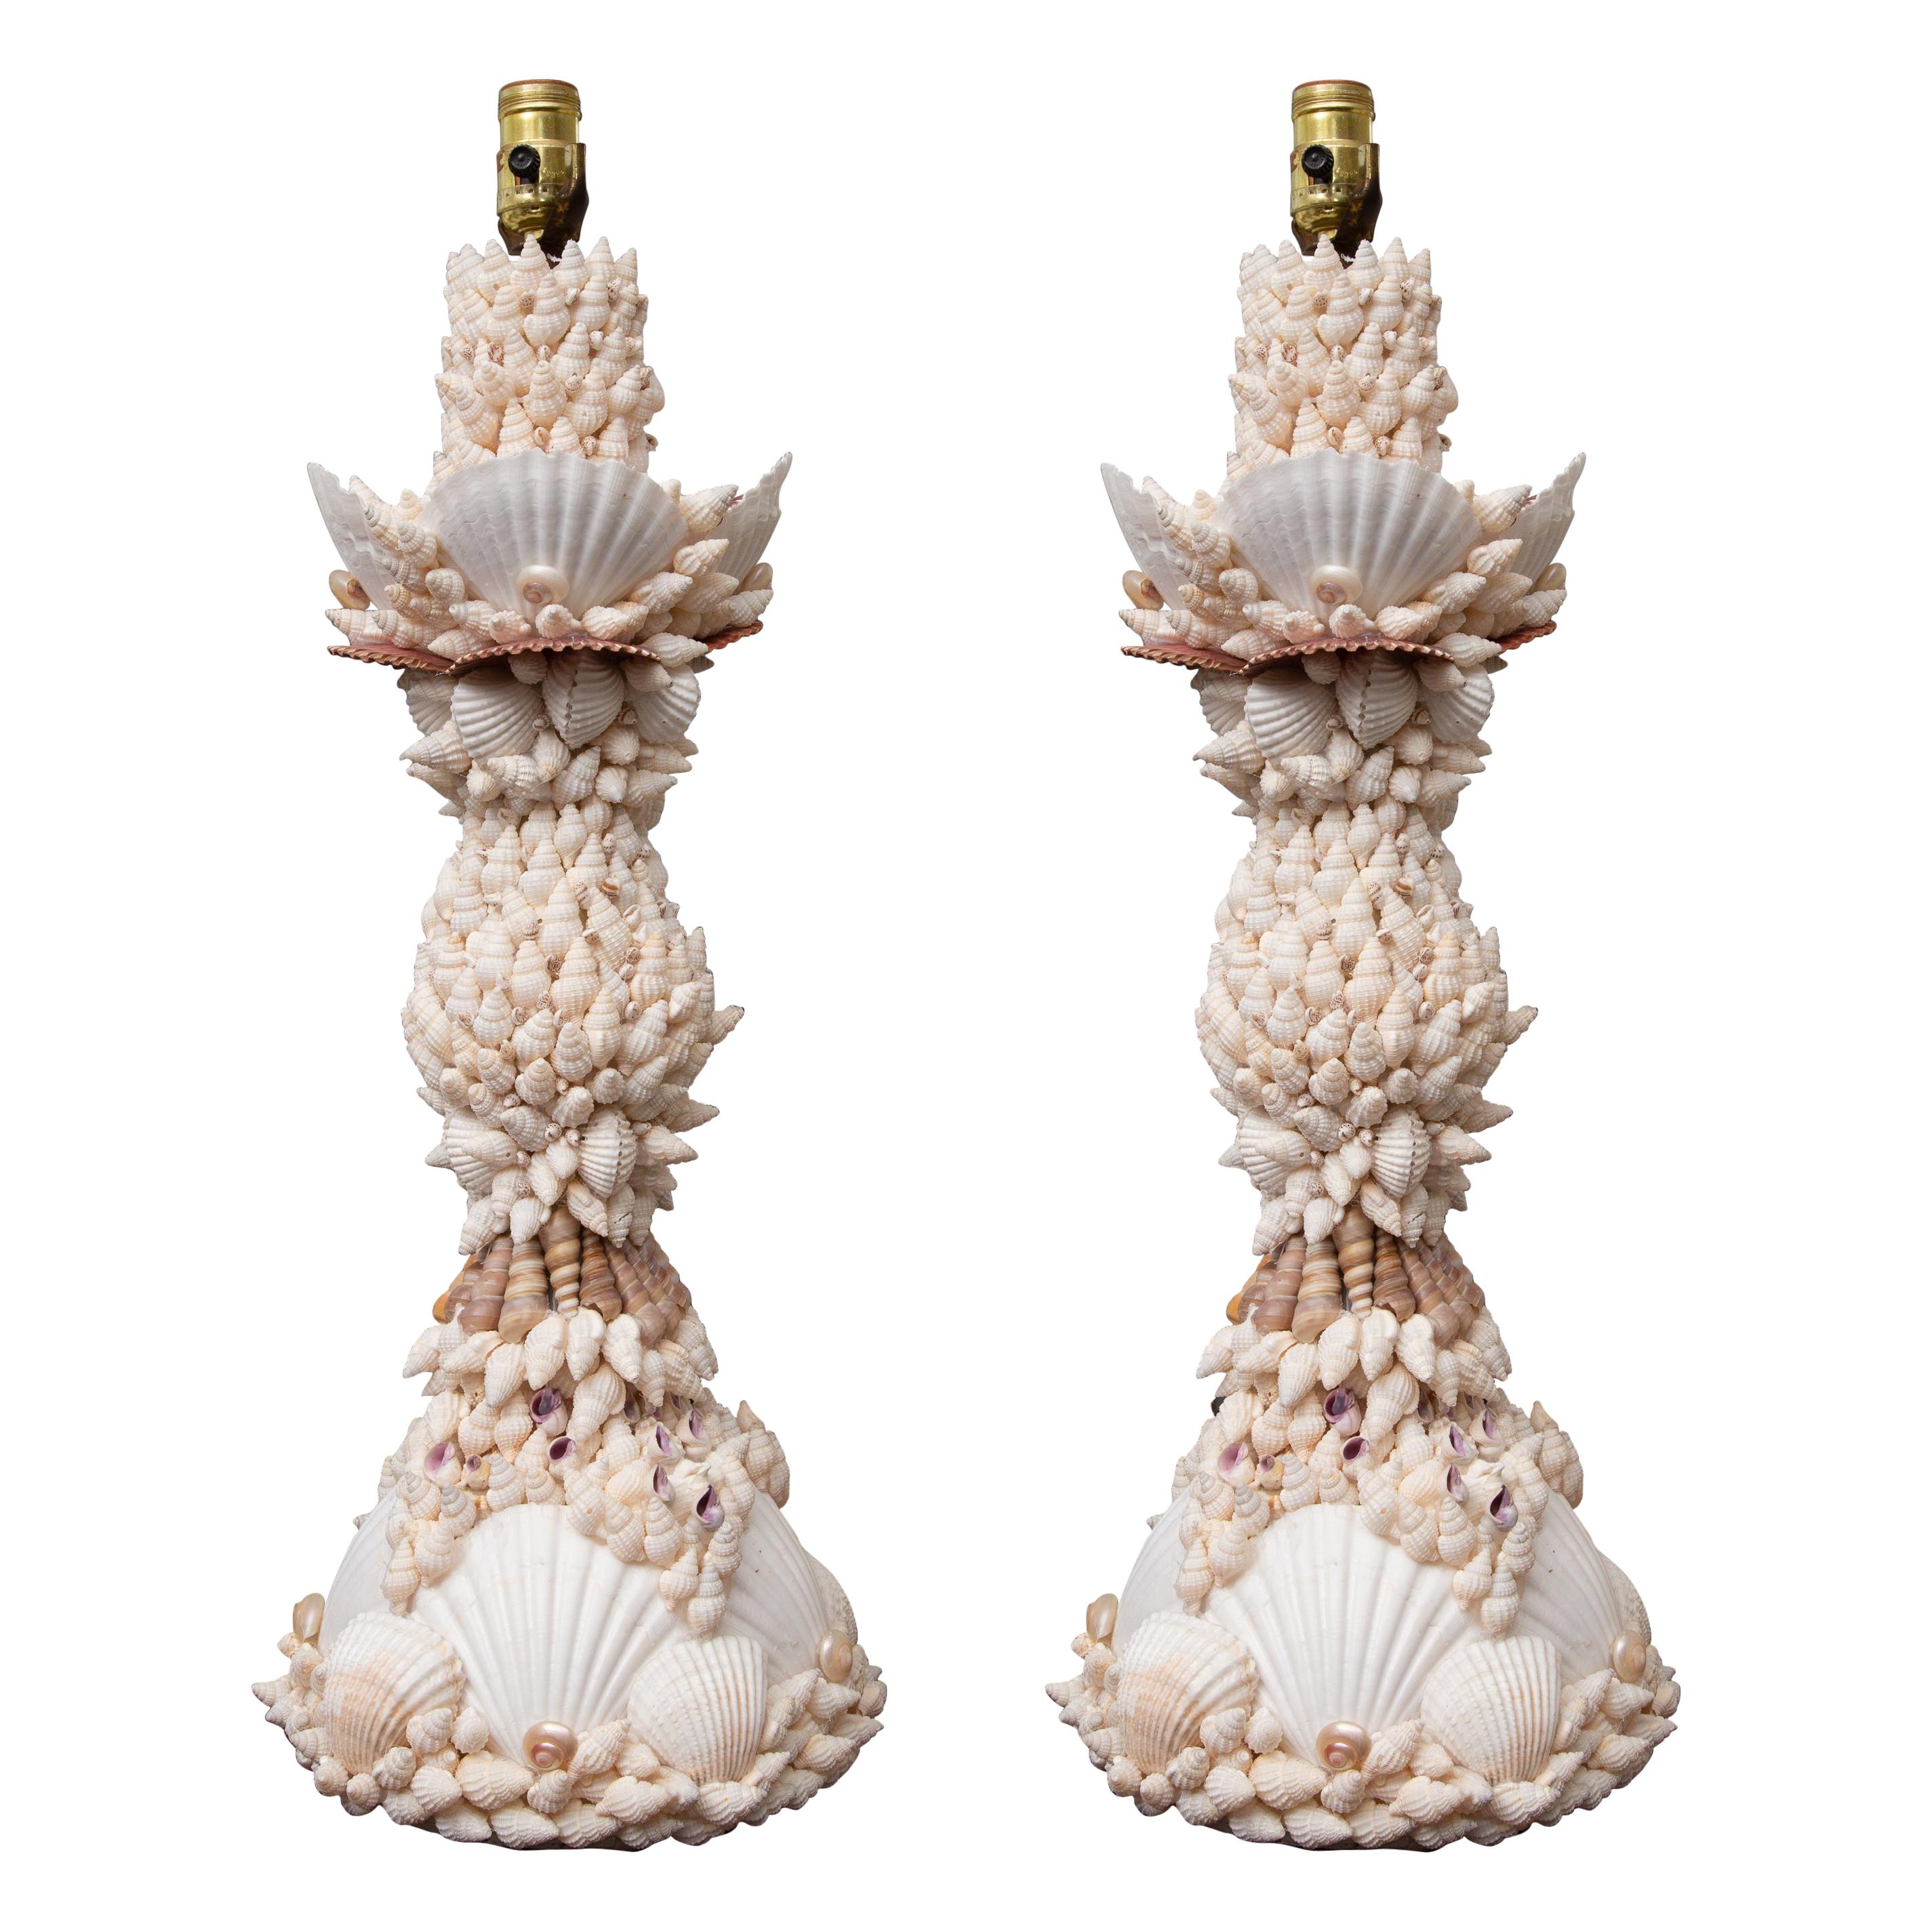 Pair of Shell Encrusted Table Lamps